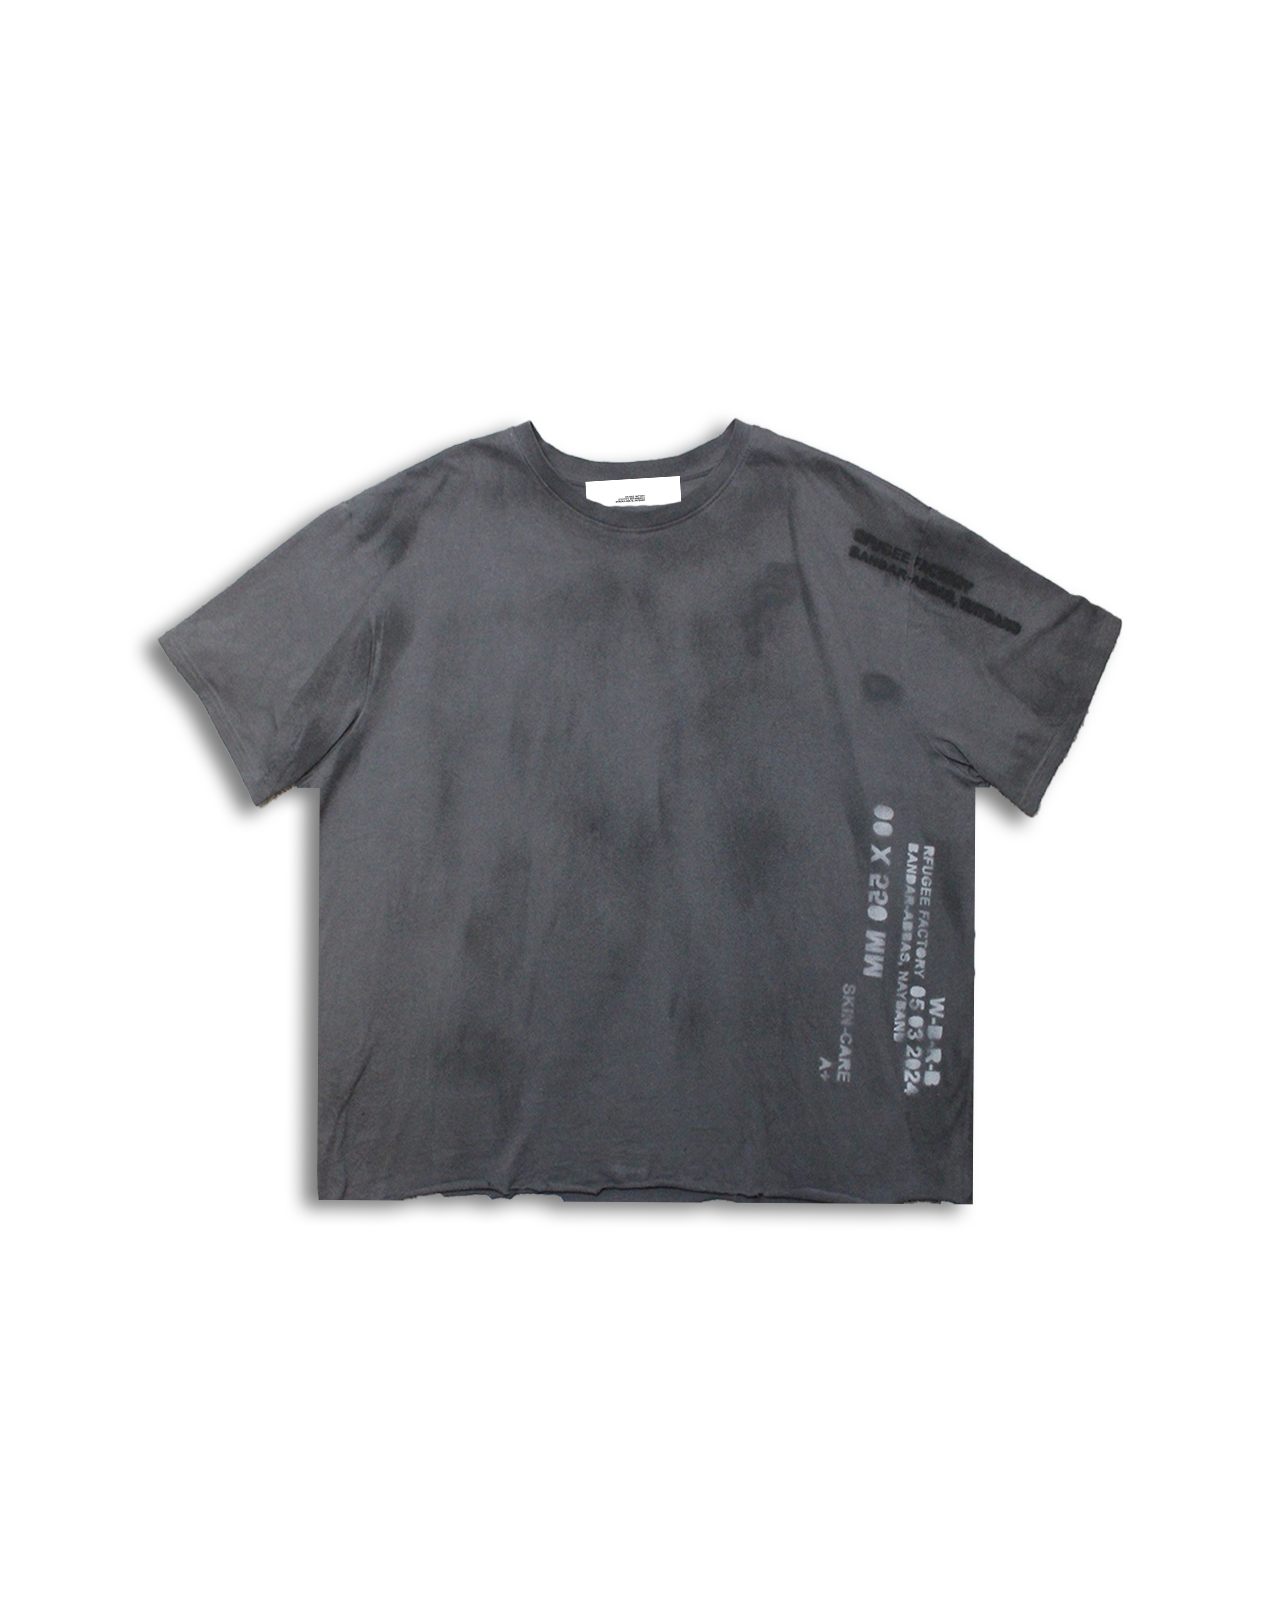 FACTORY FADED SHIRT